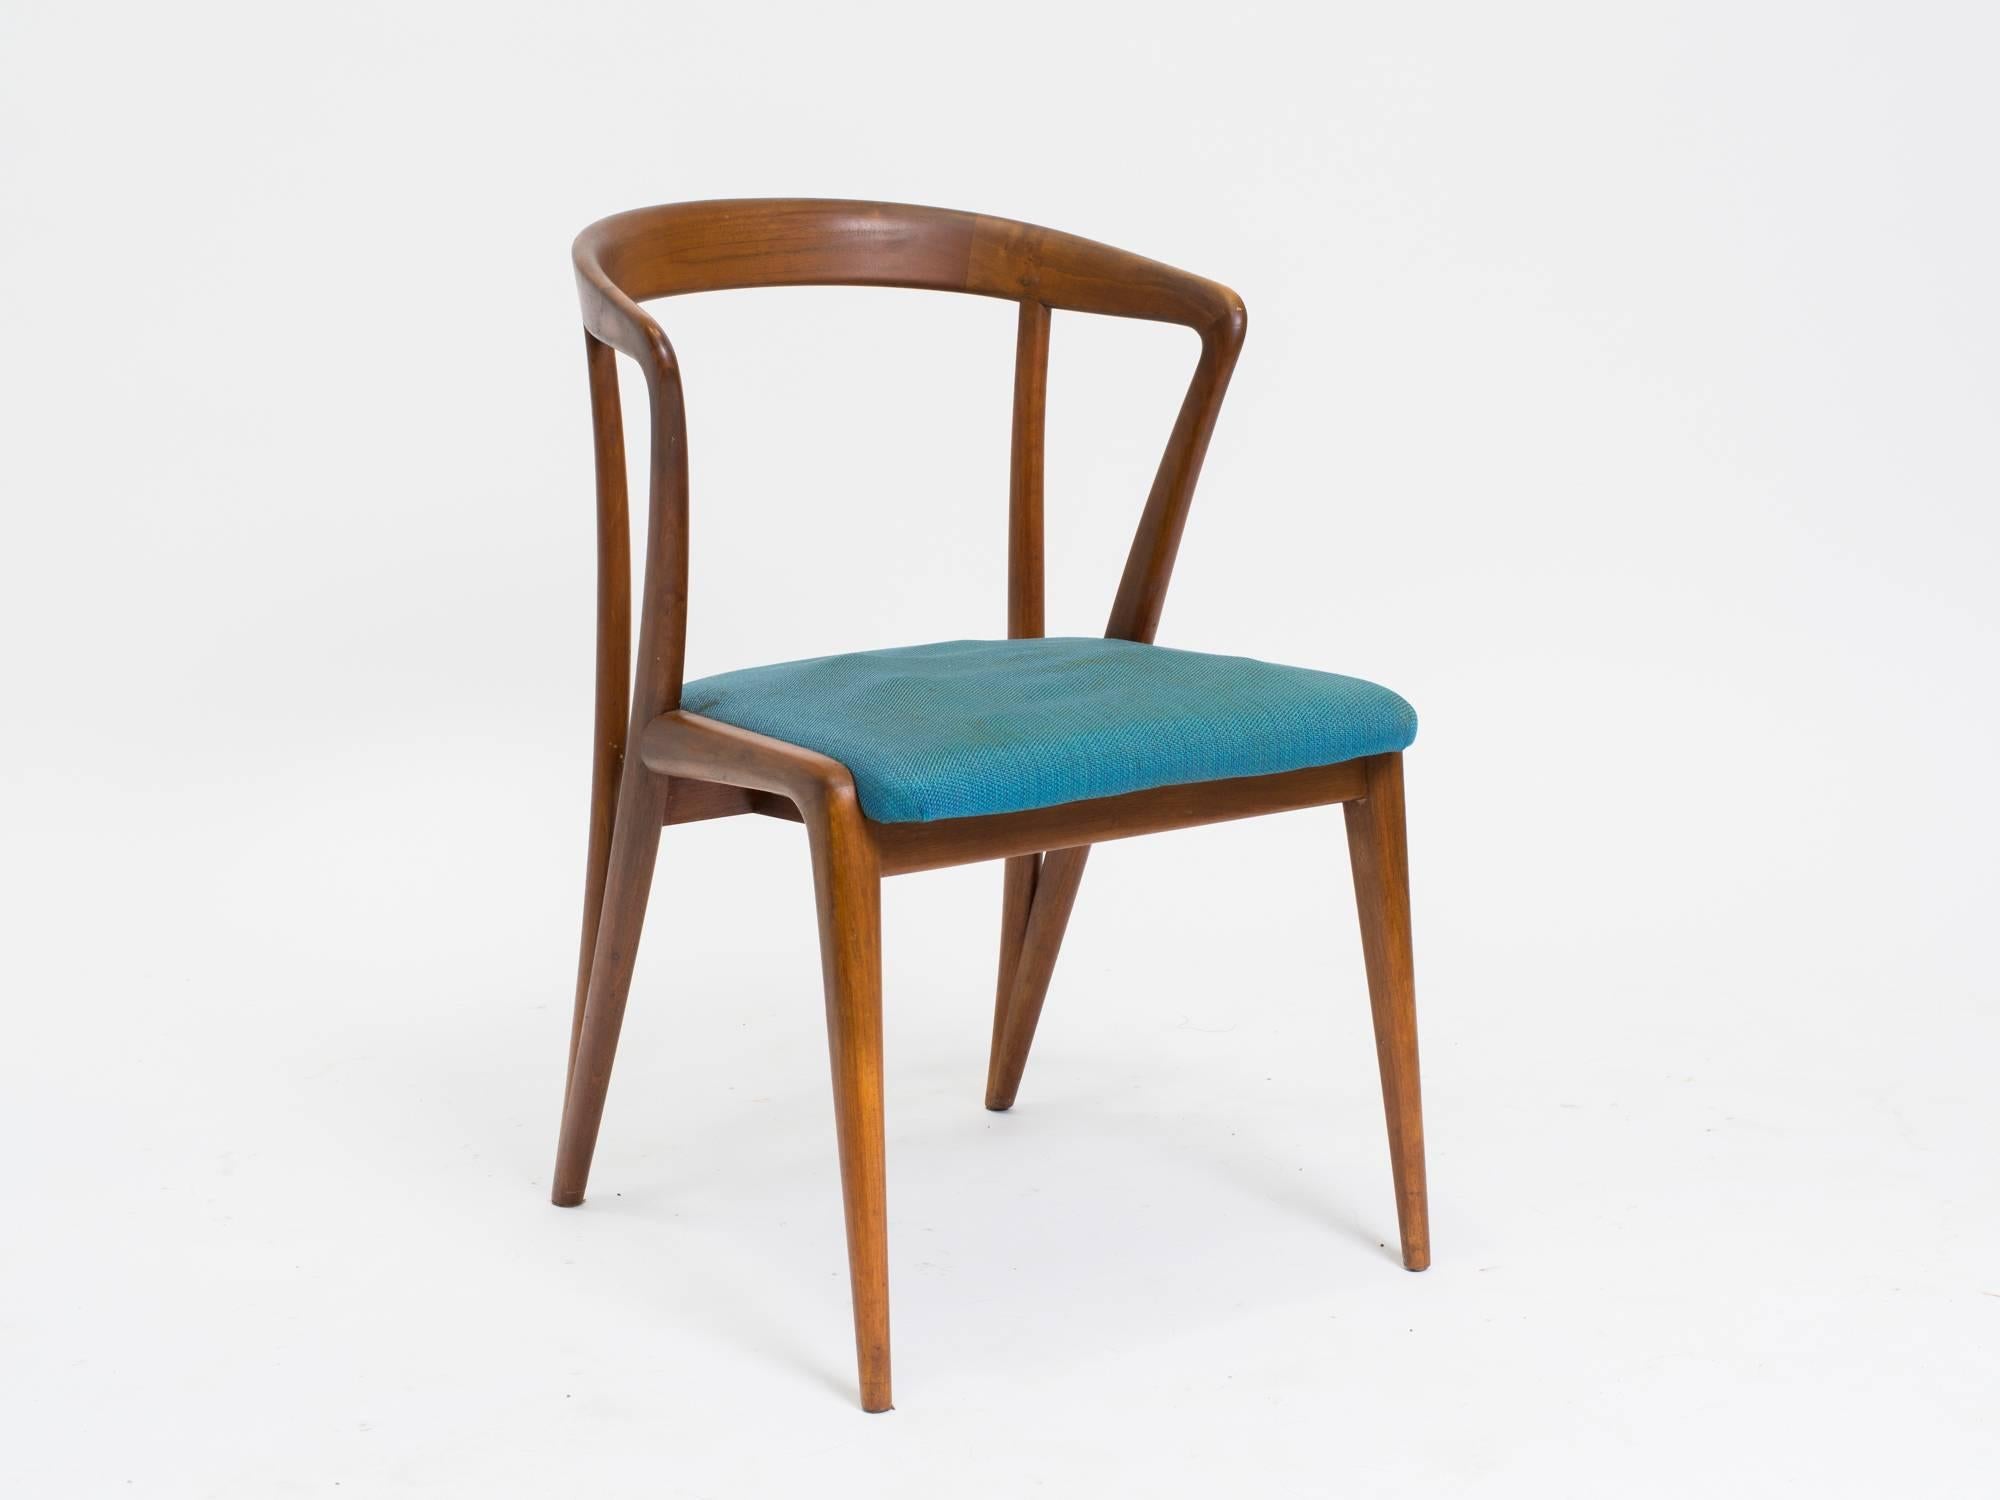 Mid-20th Century Pair of Bertha Schaefer armchairs for Singer and sons